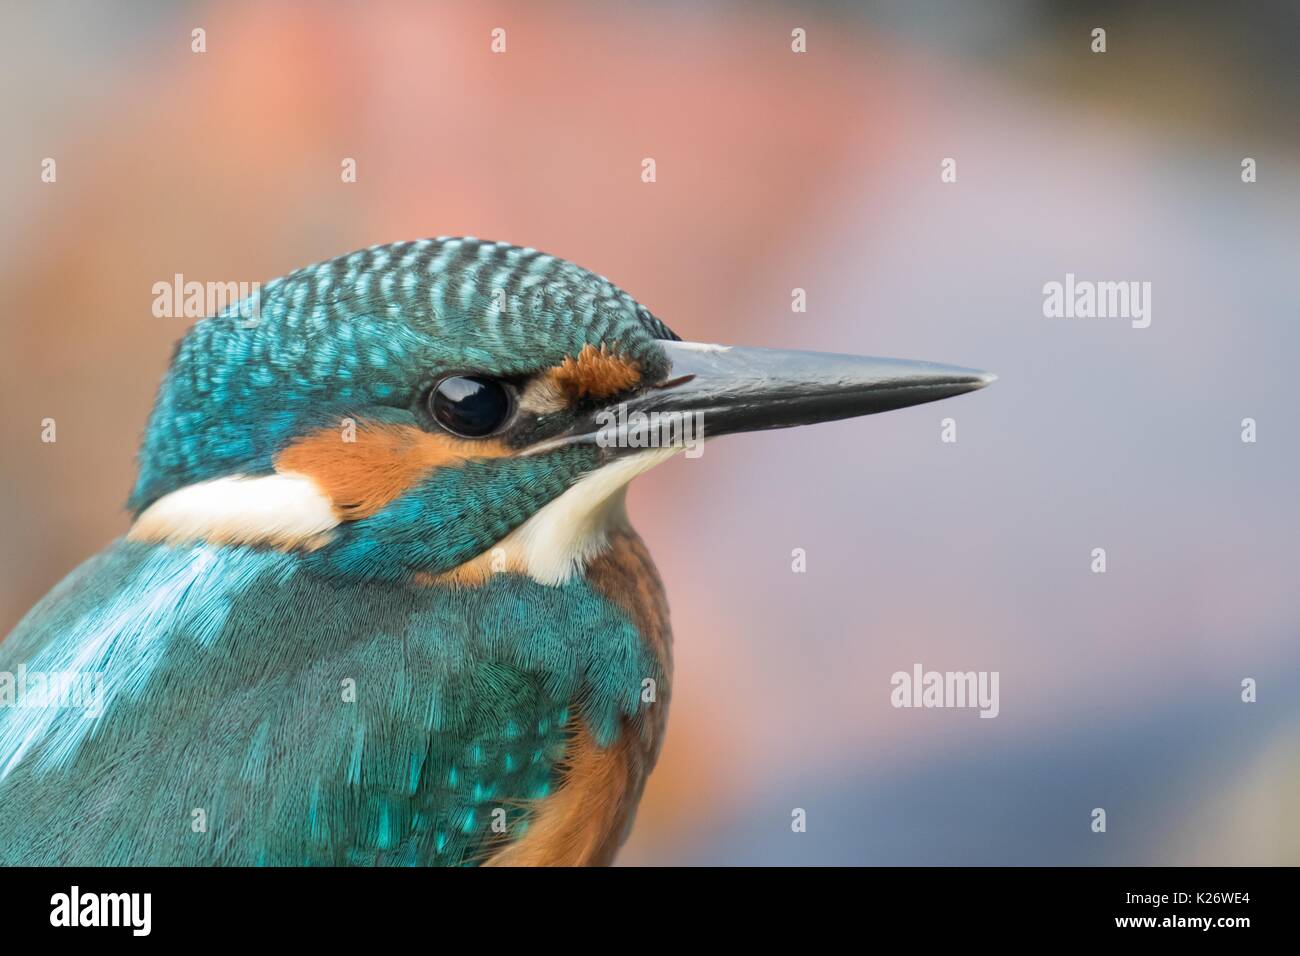 Male kingfisher (Alcedo atthis), young bird, portrait, Hesse, Germany Stock Photo